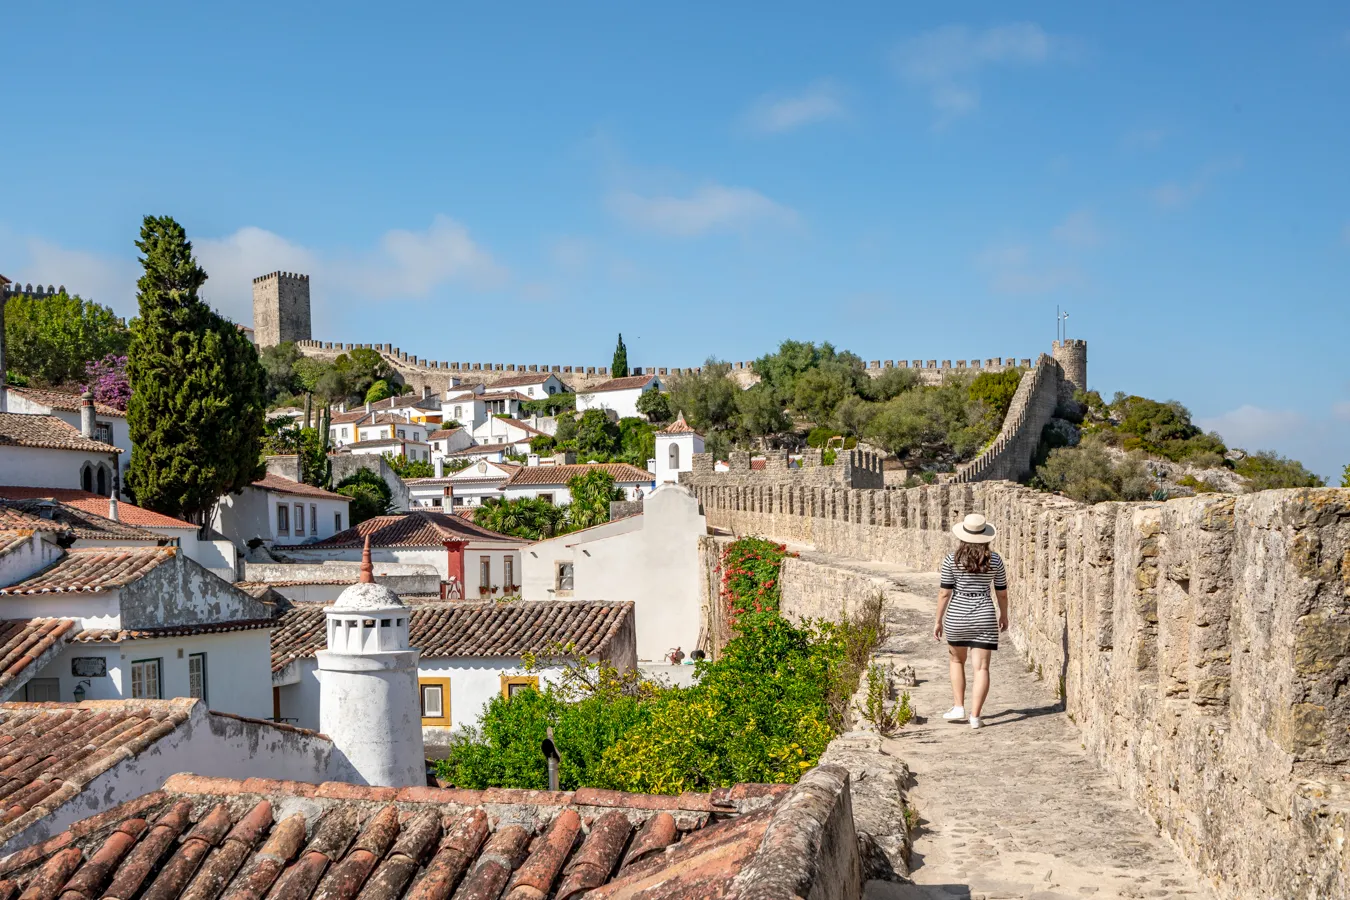 kate storm walking along the castle walls, one of the best things to do in obidos portugal